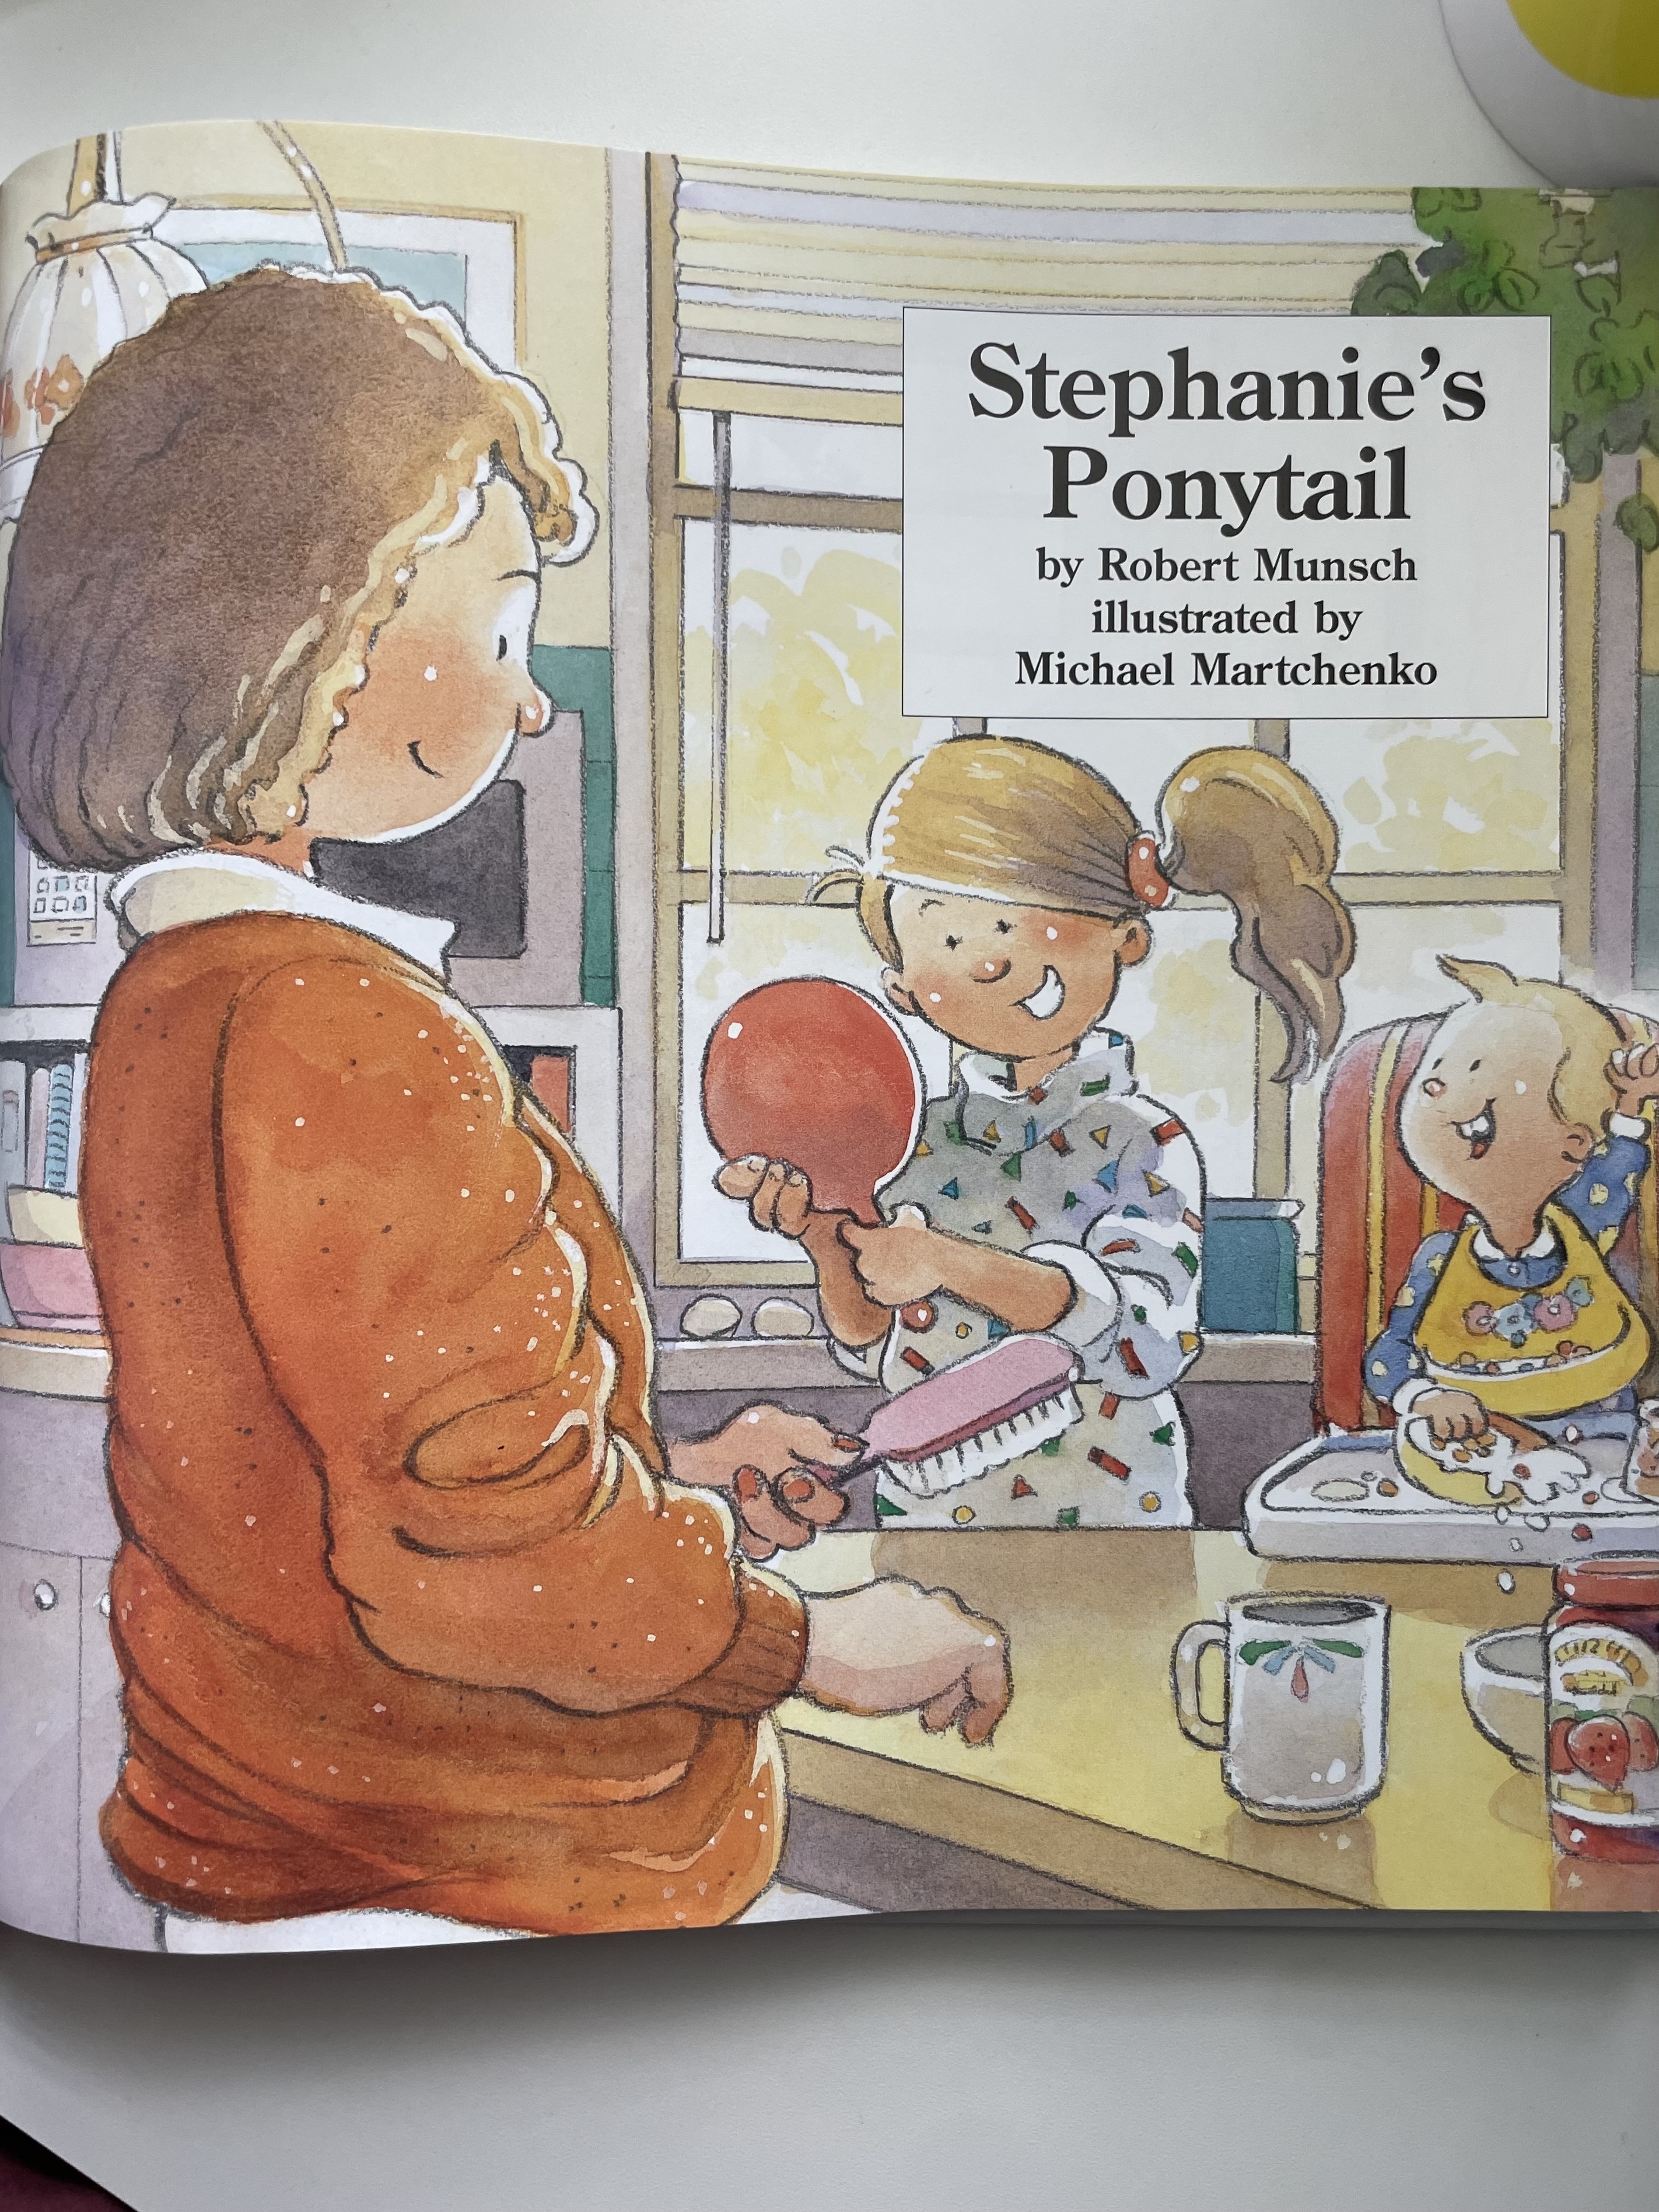 Illustration of a book cover titled &quot;Stephanie&#x27;s Ponytail&quot; with author names Robert Munsch and Michael Martchenko. Shows a girl with a ponytail facing a mirror held by an adult